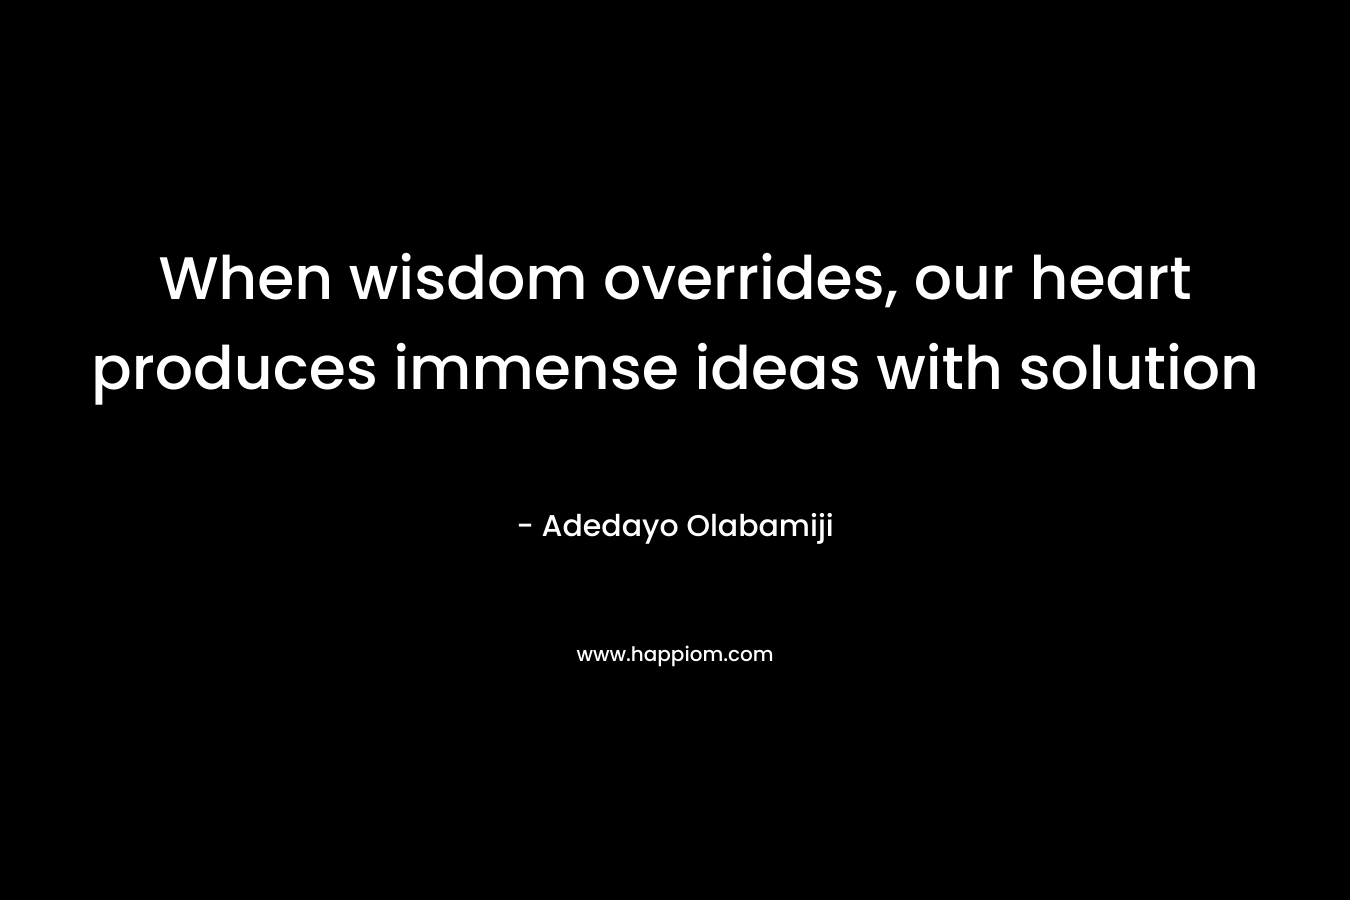 When wisdom overrides, our heart produces immense ideas with solution